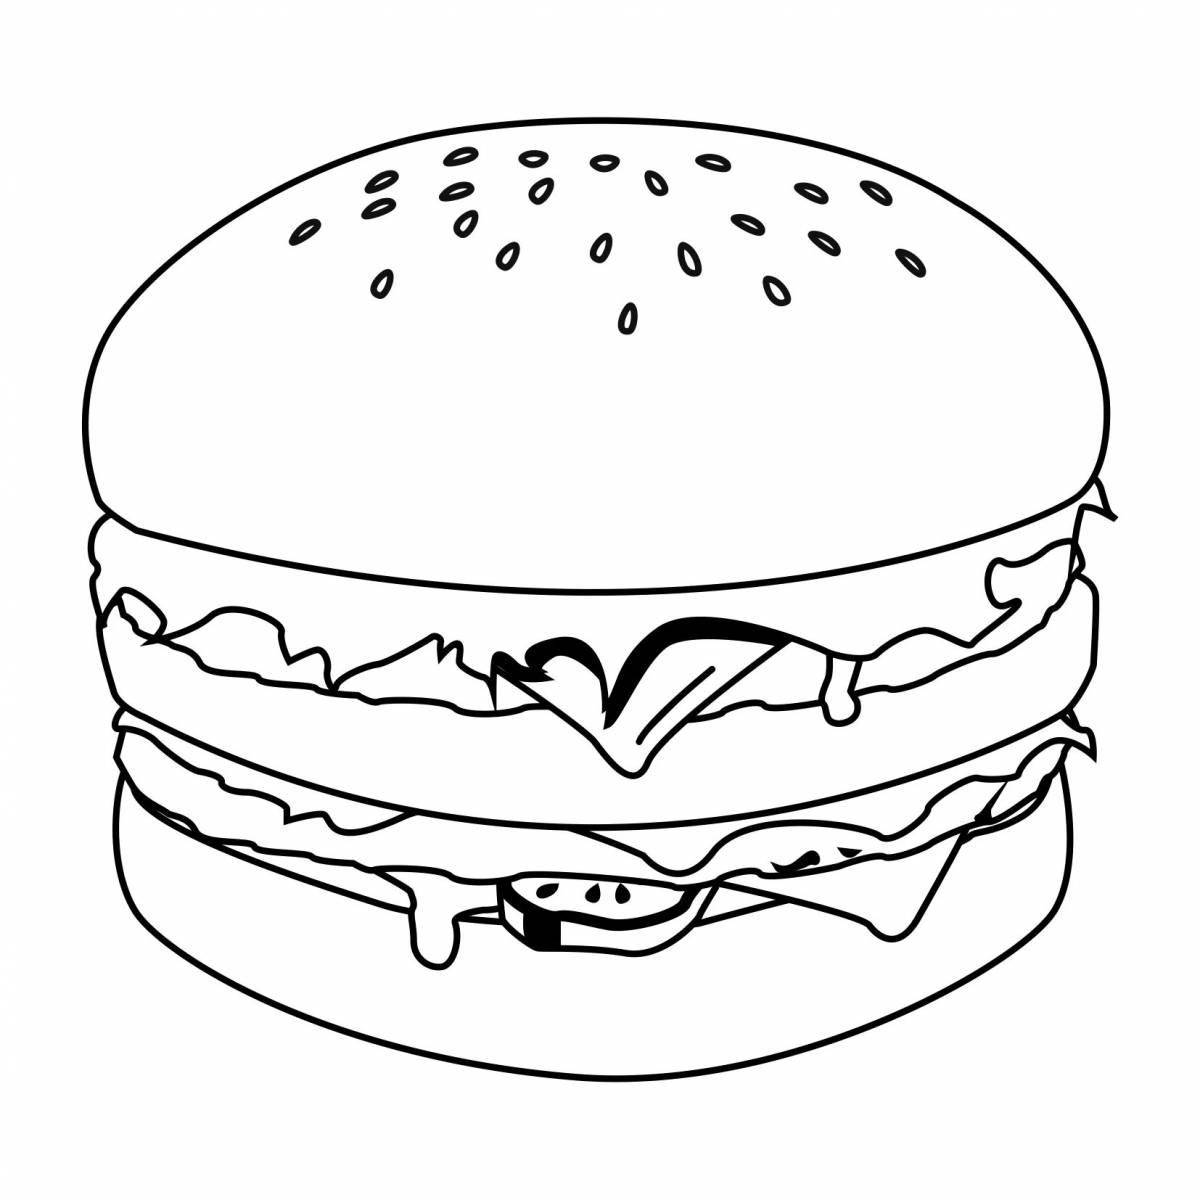 Lively tasty and point coloring page